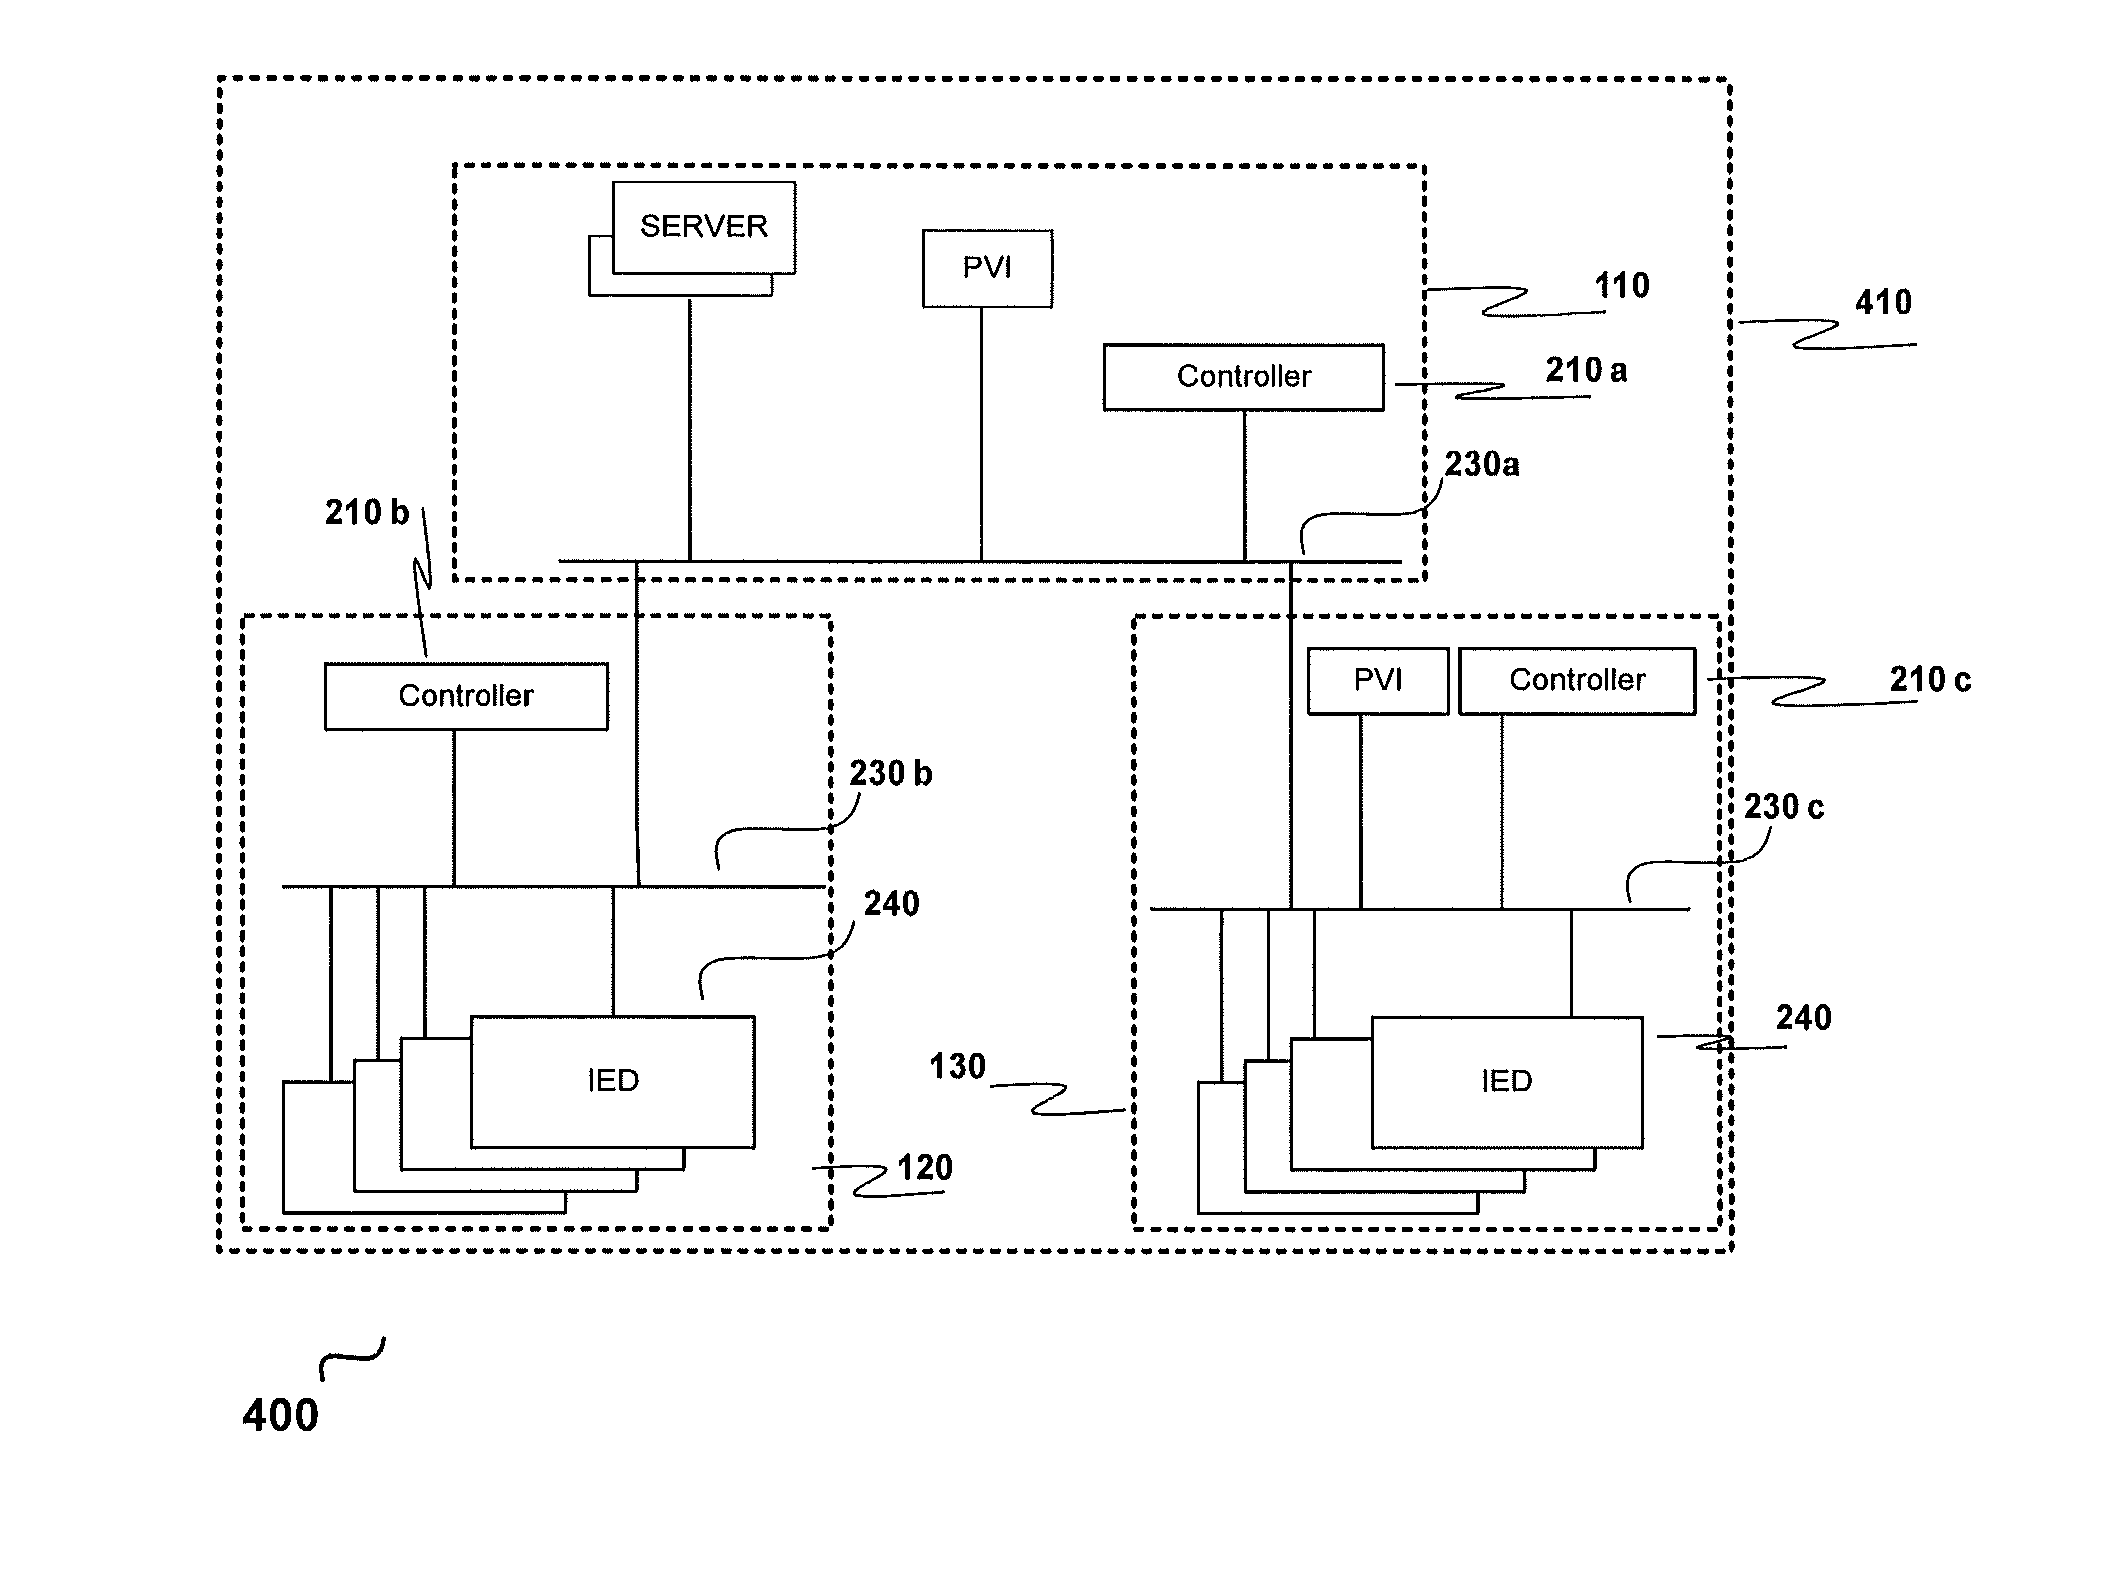 Method and system for power management